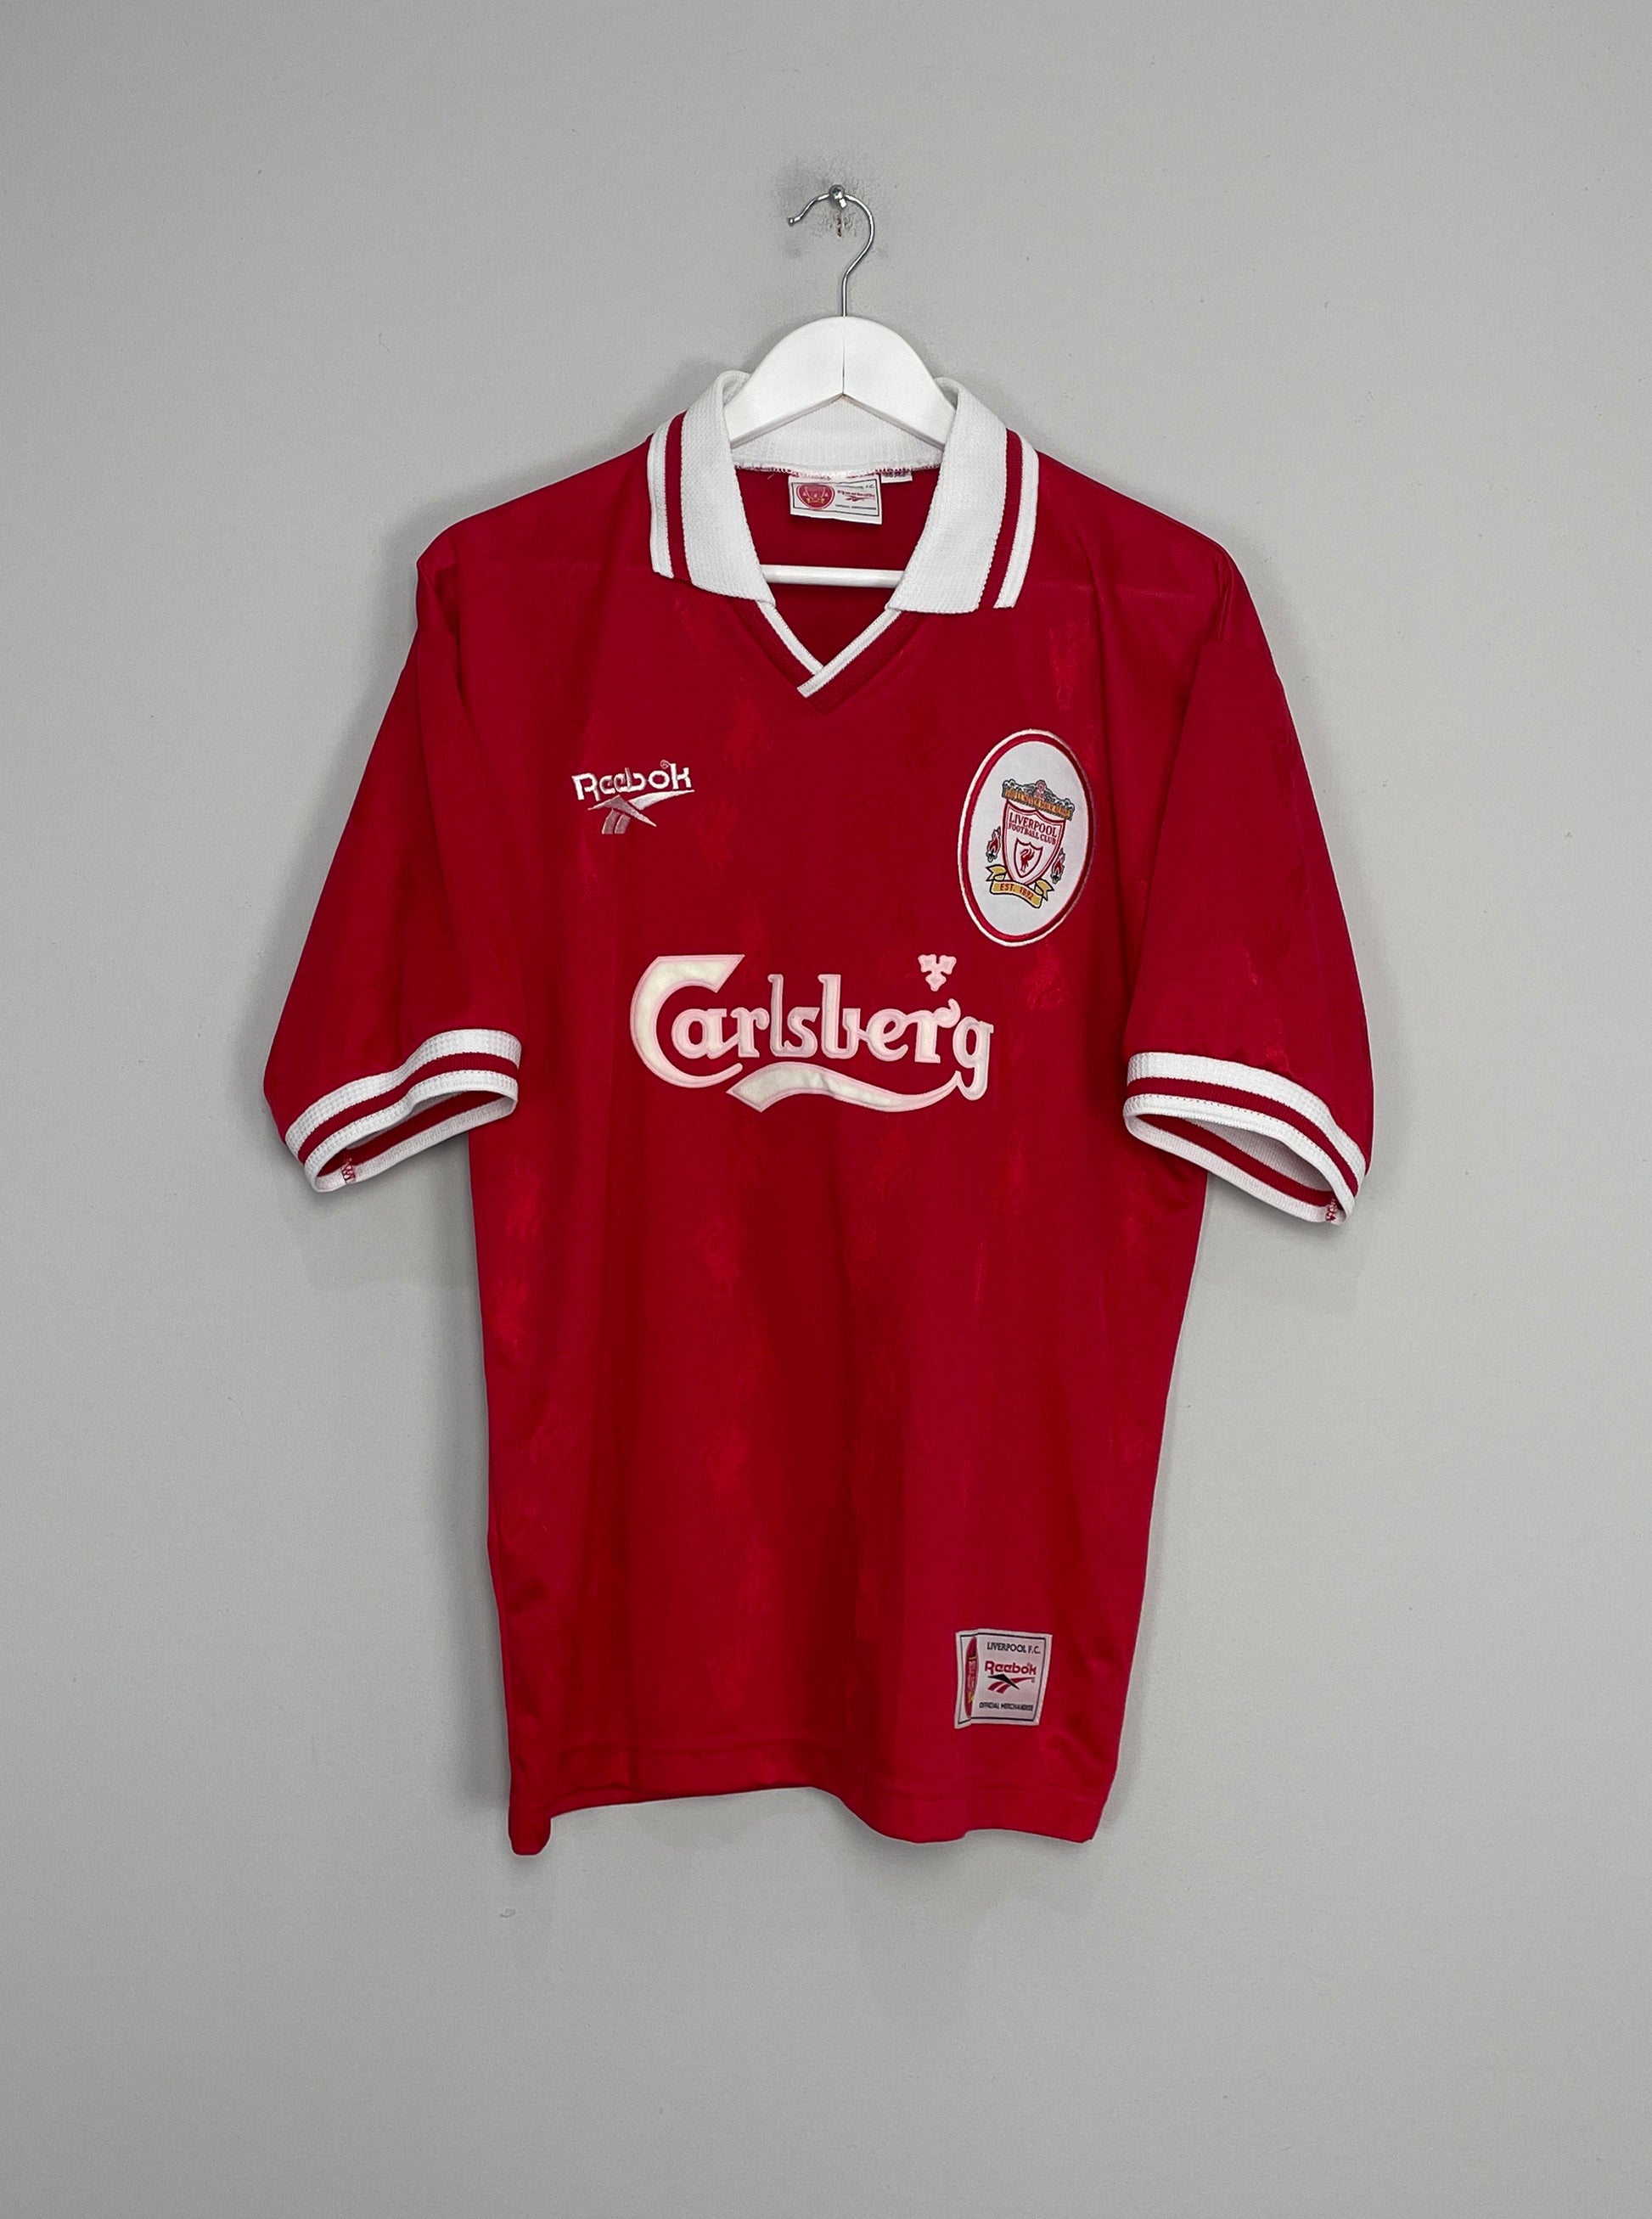 Image of the Liverpool shirt from the 1996/98 season